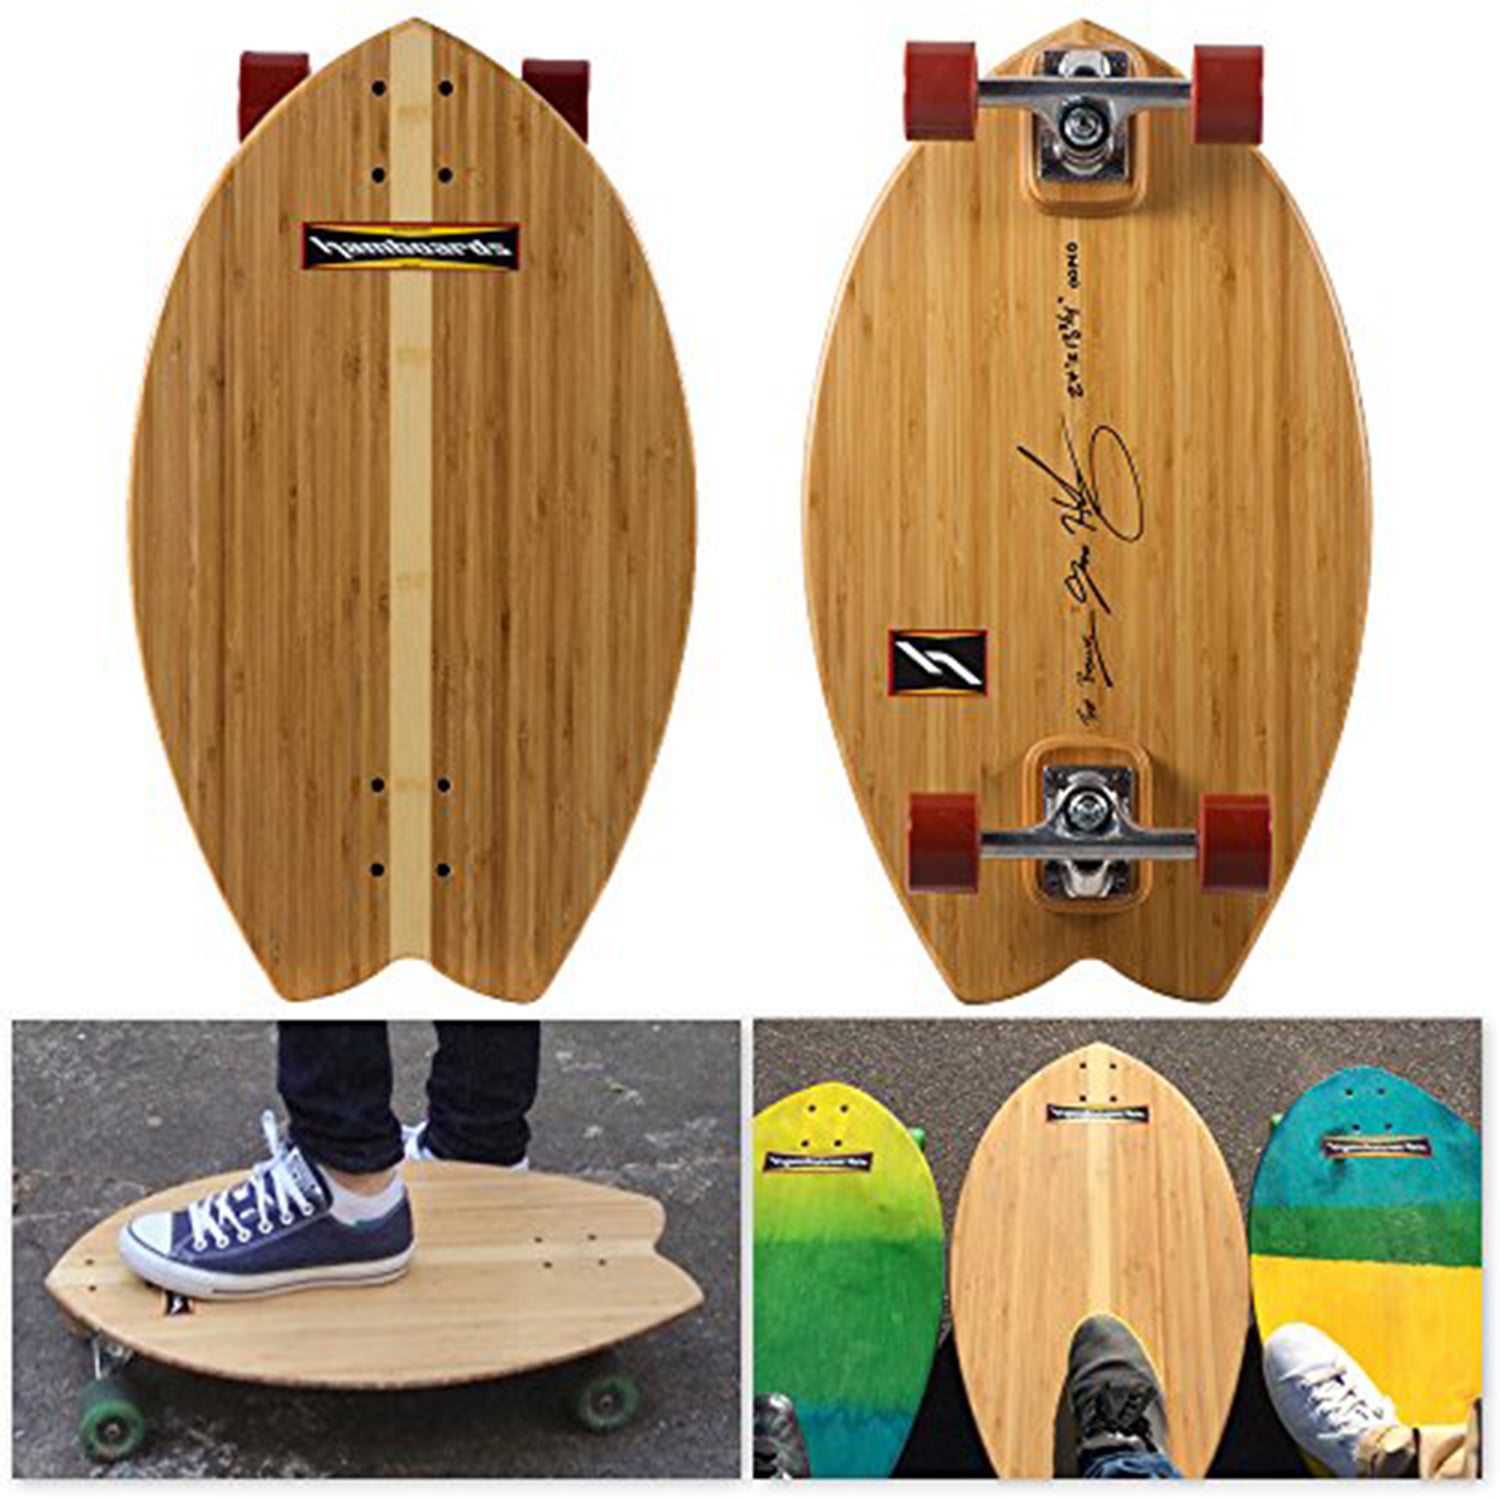 Landsurfing & Land Paddling Hamboards Biscuit Handcrafted Campus Cruiser Longboard Skateboard for Pumping Laminated Birch/Super Hard Bamboo